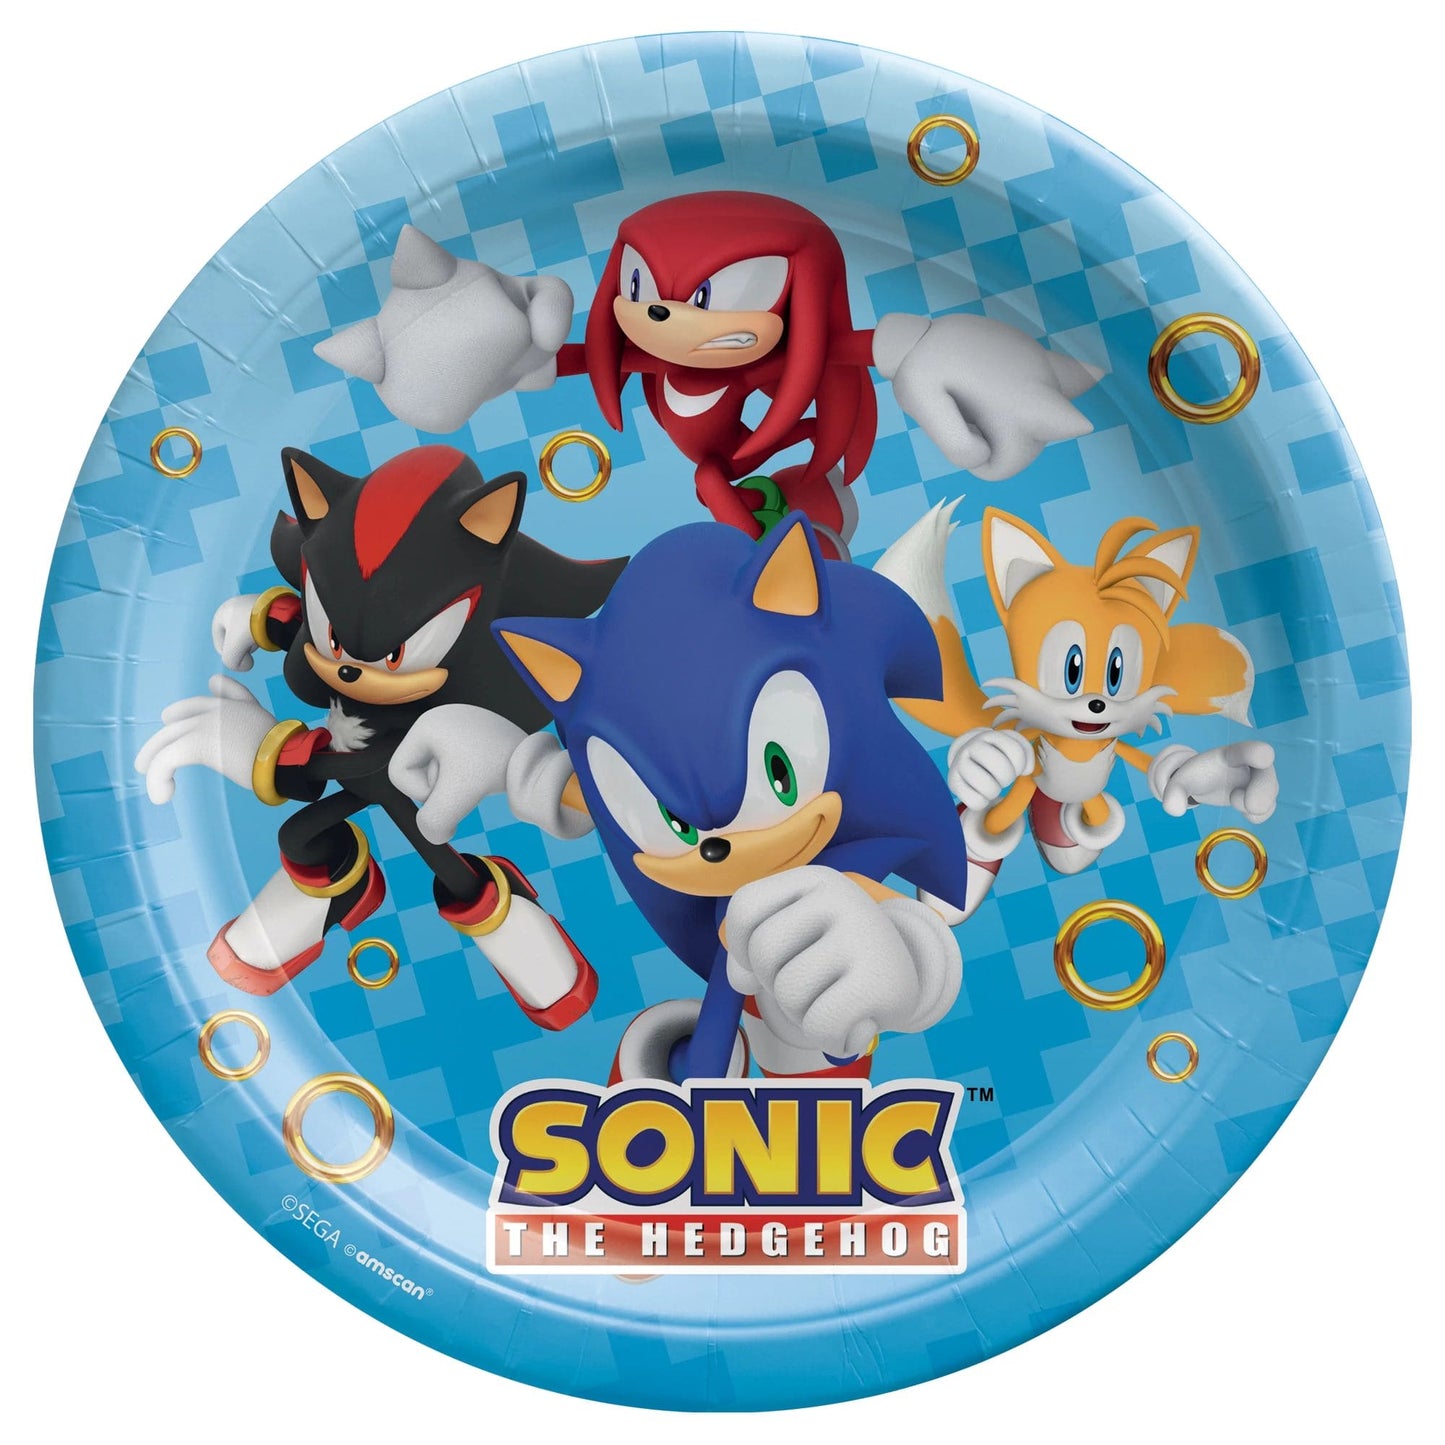 Sonic The Hedgehog 9in Dinner Plates 8 Ct